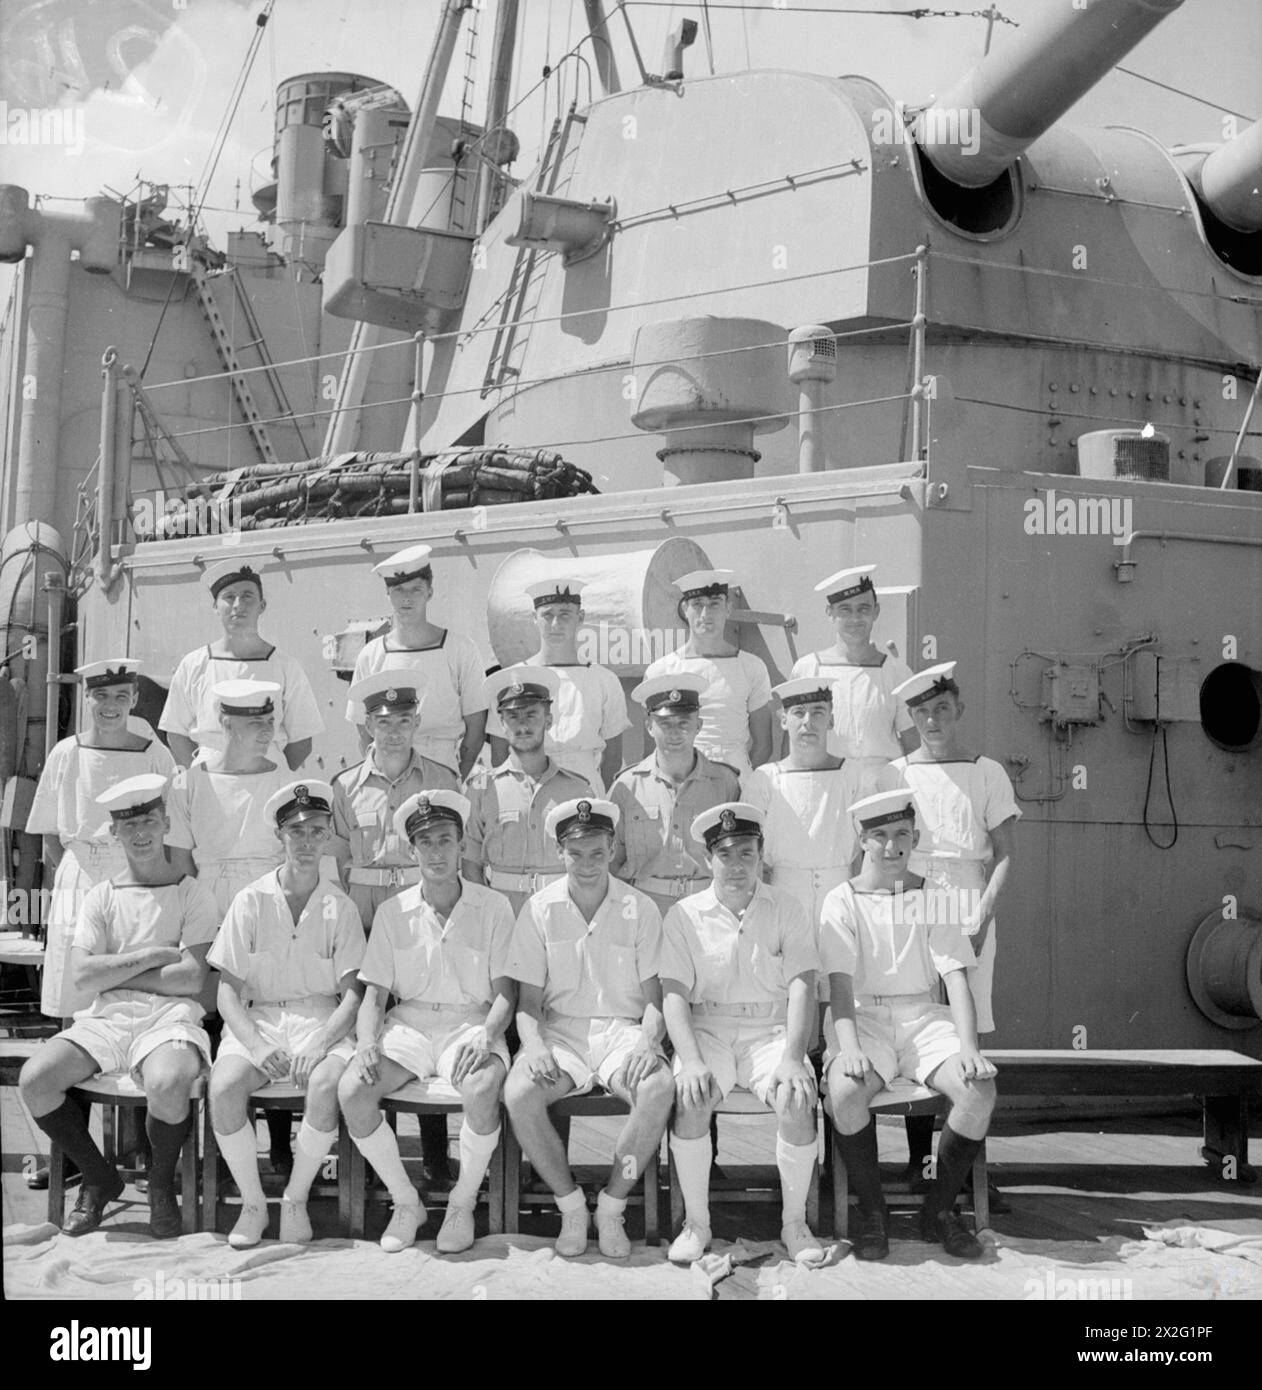 MEN OF THE HMS SUFFOLK, A CRUISER SERVING WITH ADMIRAL JAMES SOMERVILLE'S EASTERN FLEET. 12 DECEMBER 1943, TRINCOMALEE. THE MEN ARE DIVIDED INTO GROUPS BY TOWN AND/OR DISTRICT. - Middlesex group. Front row, left to right; Stoker R Grant, Feltham; OM Suckling, S Bush; EA S Admas, Hayes; EA D Hales, Isleworth; EA G Robinson, Ealing; AB S Wright, Hayes. Second row, left to right: AB Prentice, Hounslow; Tel R Haley, Ealing; Mne A Hodges, Hounslow; Mne V Willis, Hayes End; Mne R Tagg, Southall; Stoker G Ash, Cowely; Stoker A Clarke, S Bush. Third row, left to right: AB R Painter, Viewsley; Stoker F Stock Photo